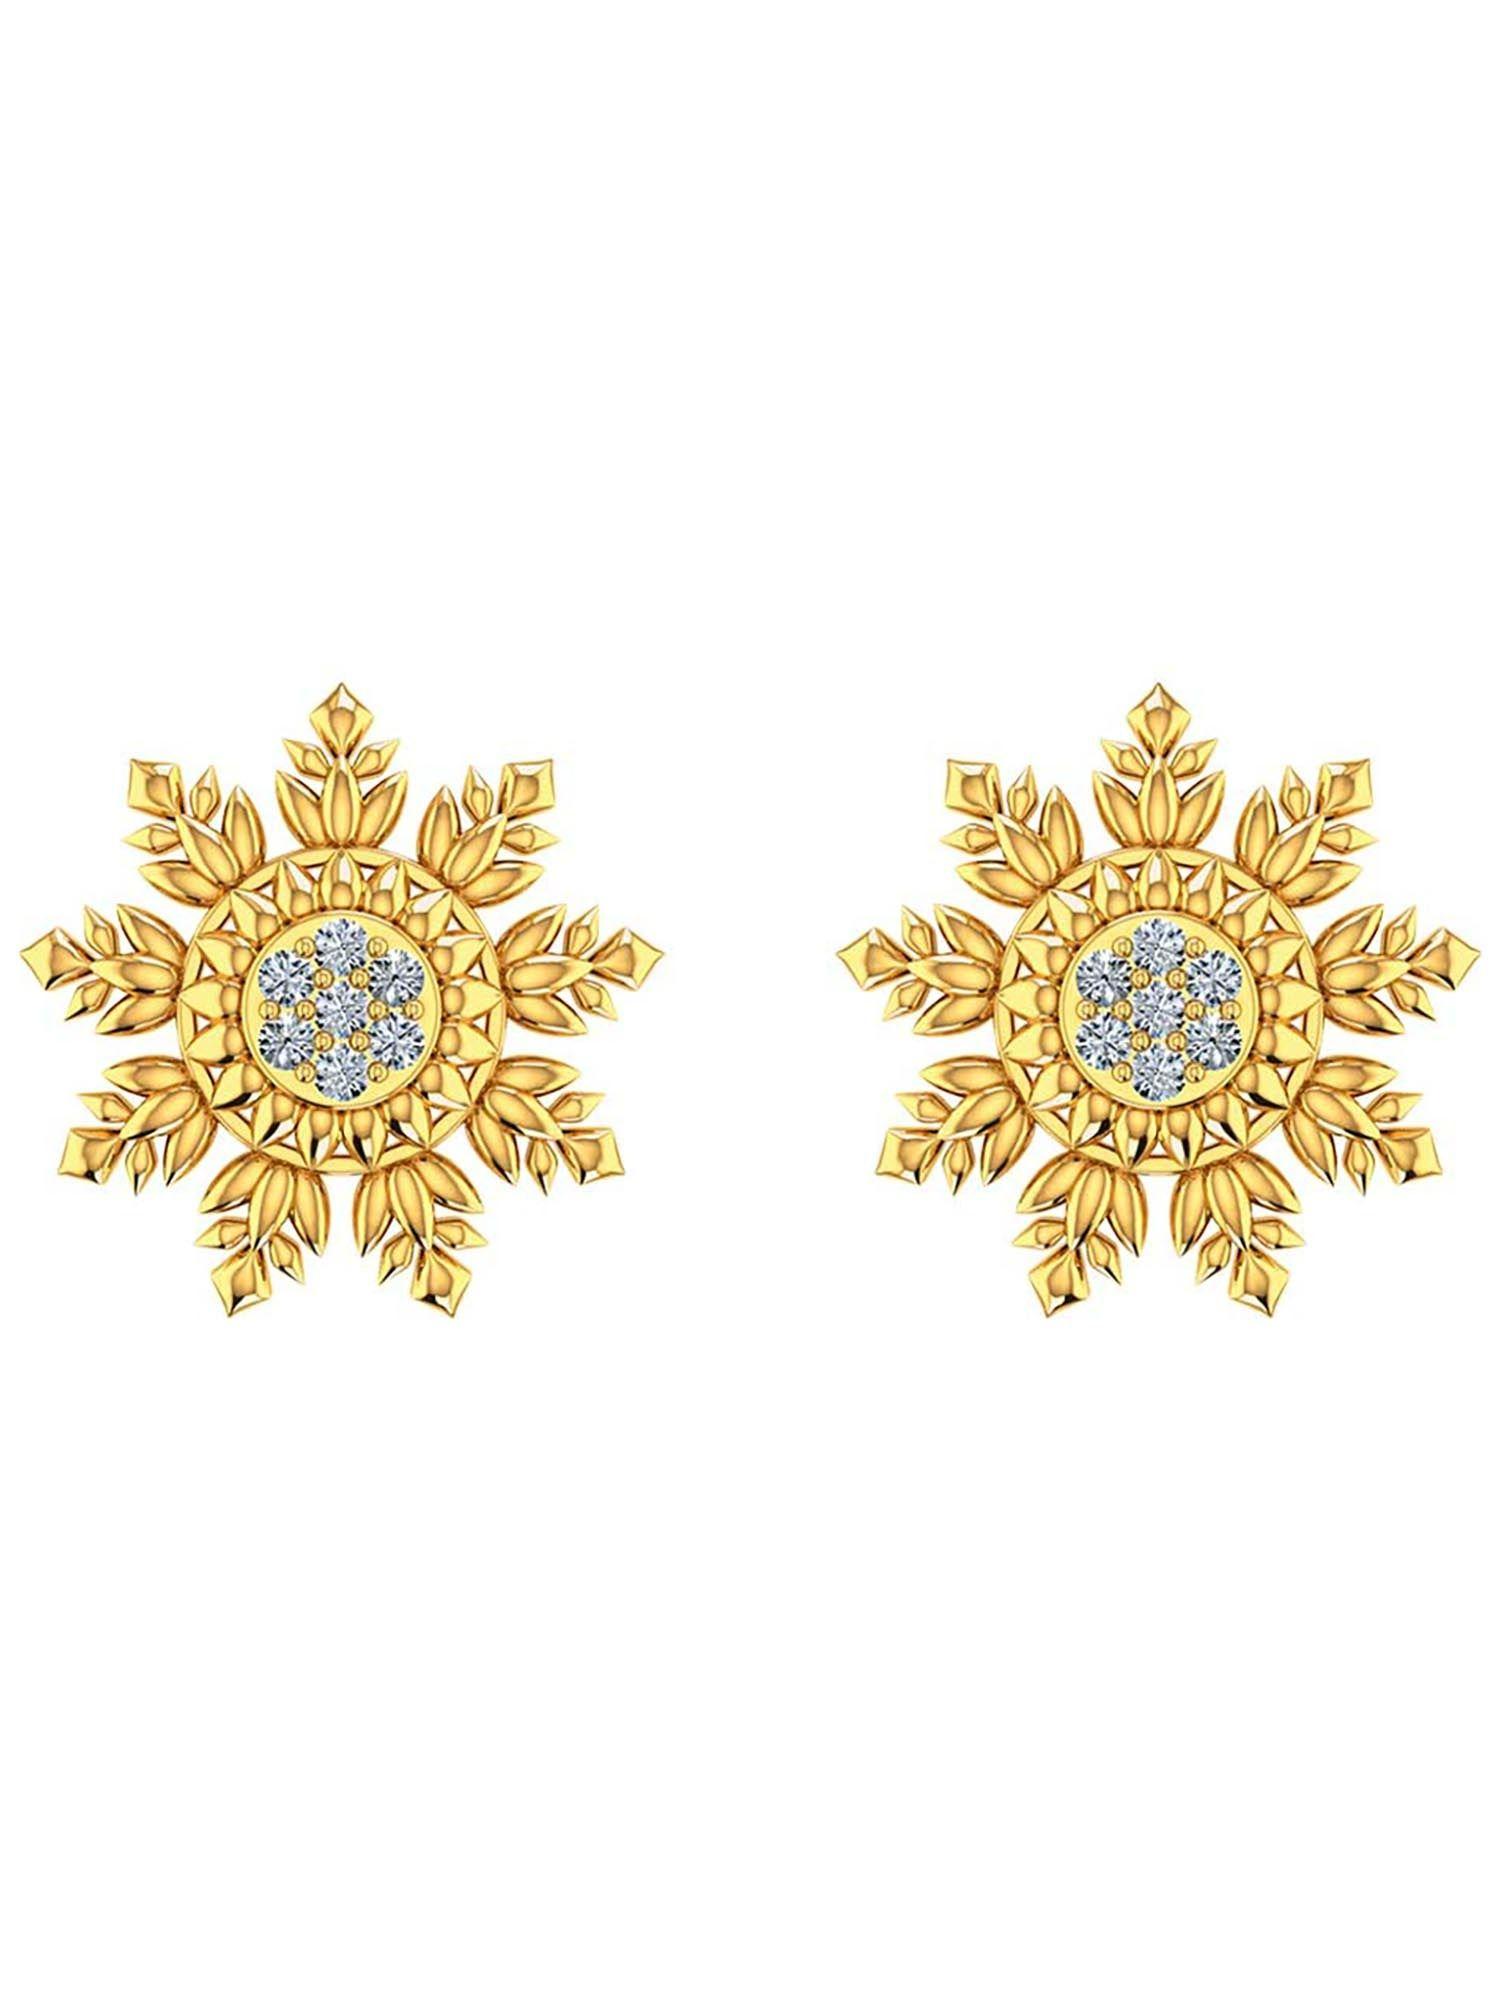 elsa stud gold earrings with gold screw